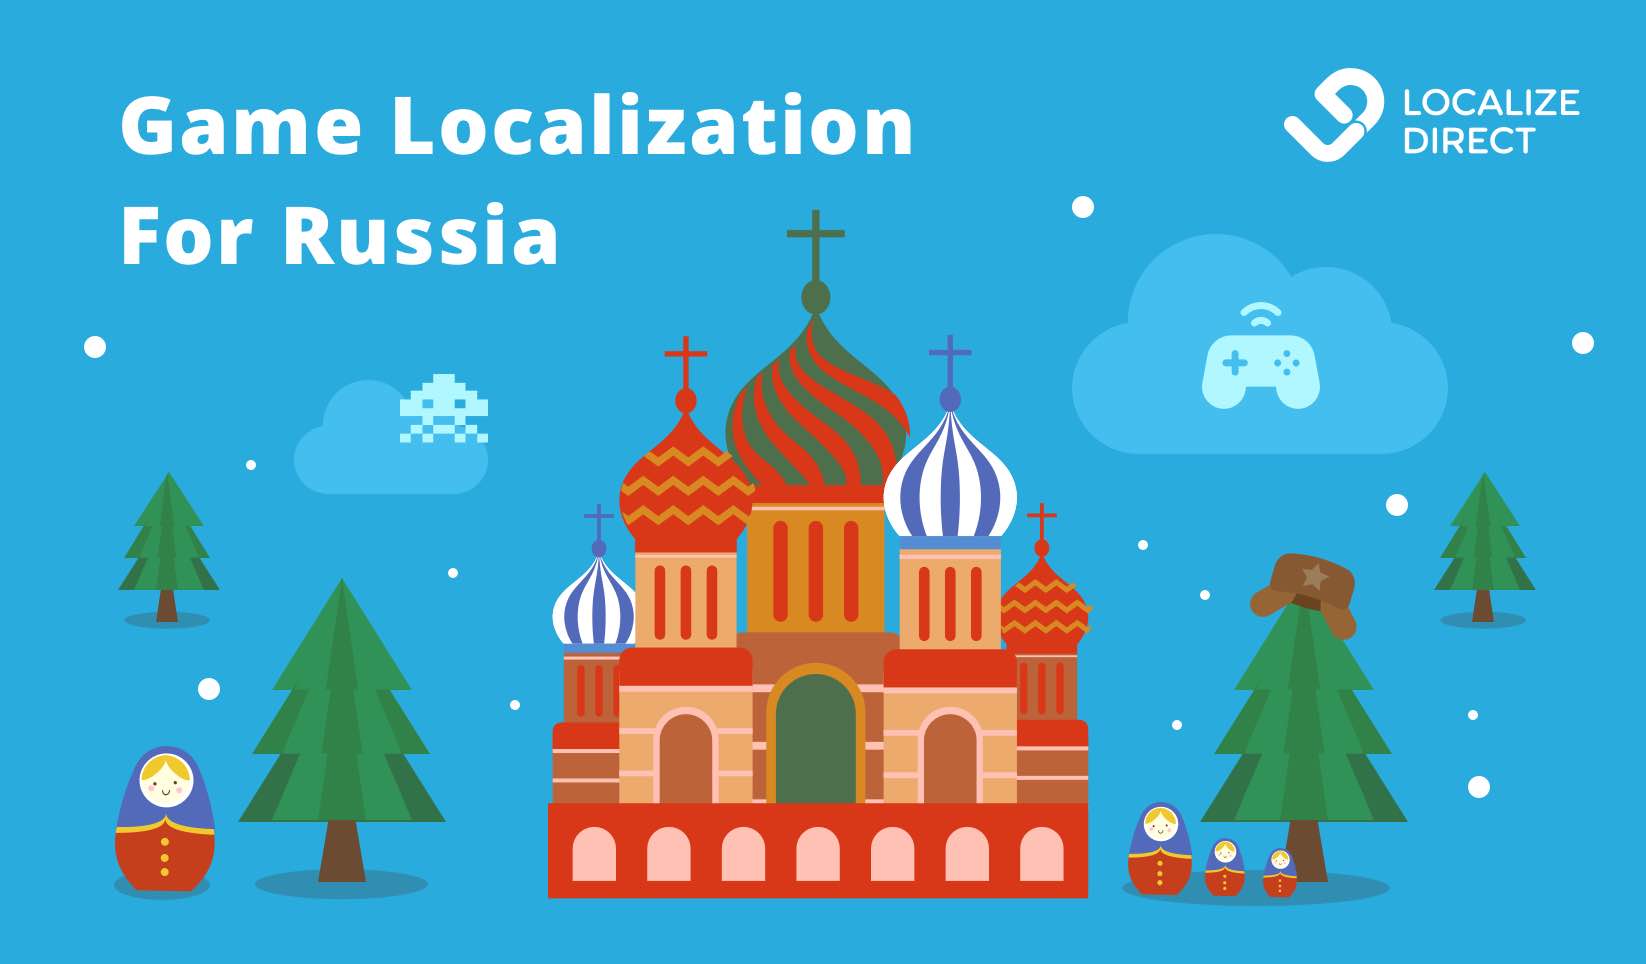 game-localization-for-russia-go-hard-or-go-home-localizedirect